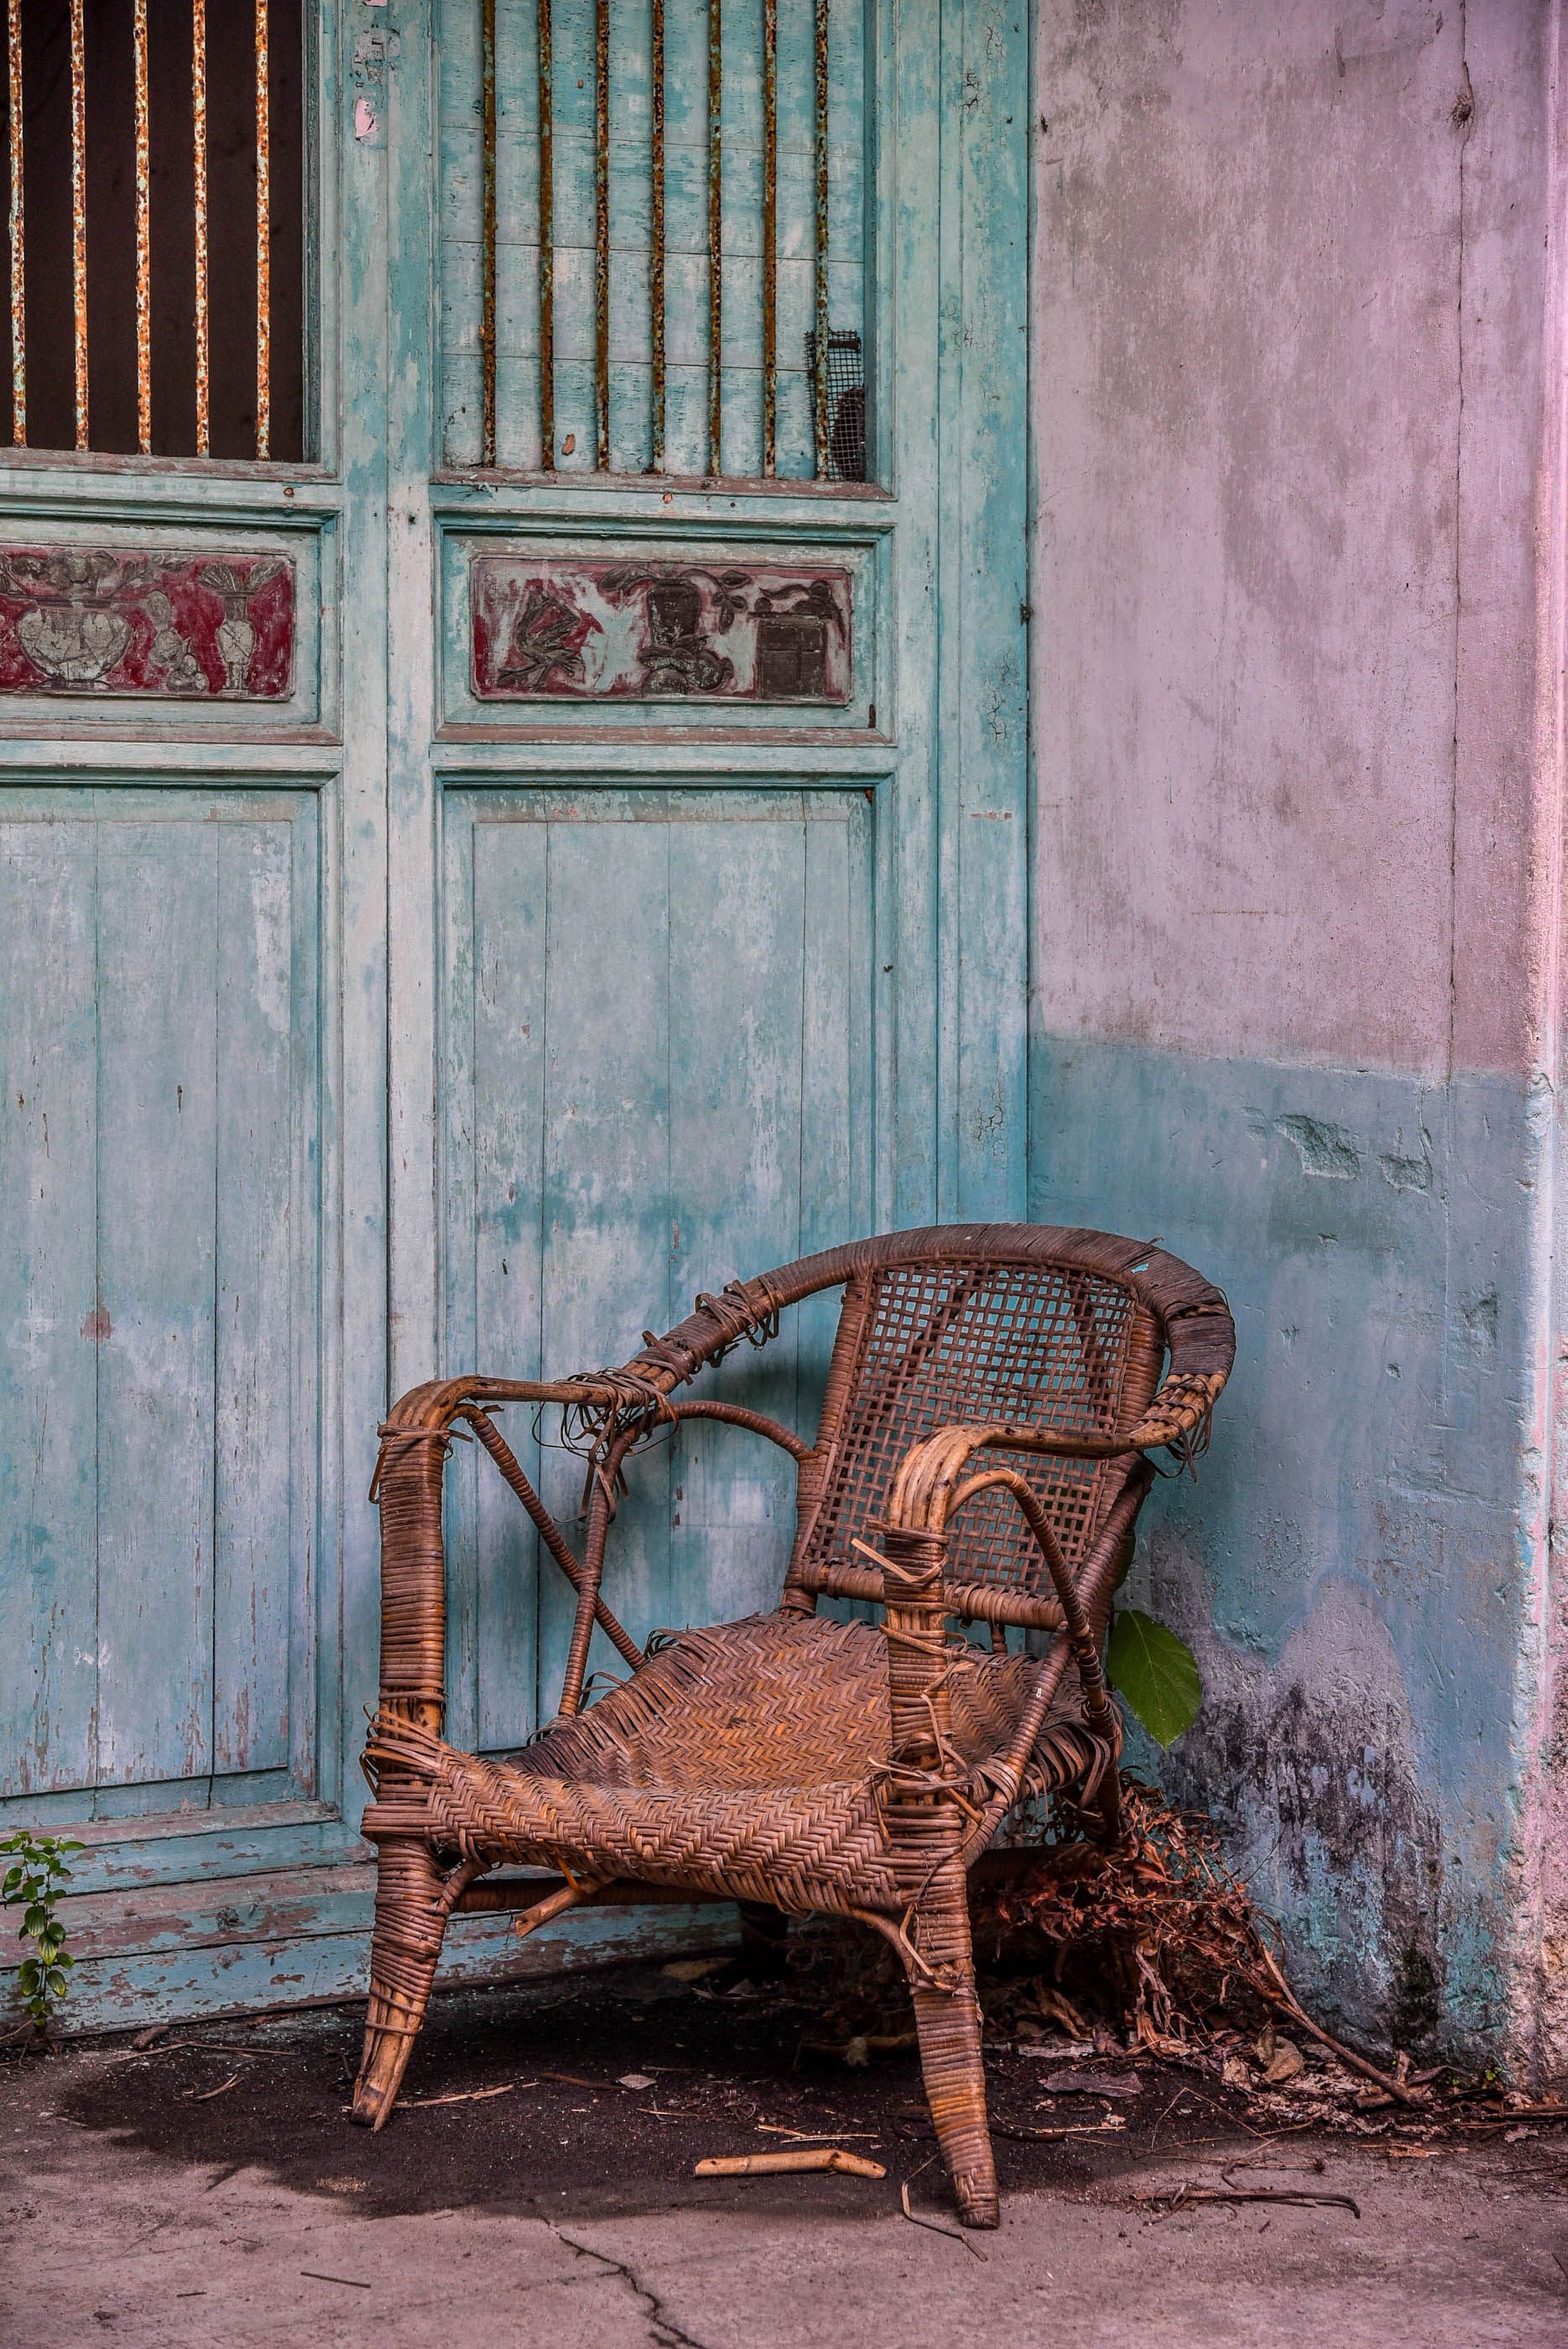 A photograph taken by Stefan Irvine, the photographer and urban explorer behind “Abandoned Villages of Hong Kong”, in Pun Uk, Yuen Long. Photo: courtesy of Stefan Irvine/Blue Lotus Gallery